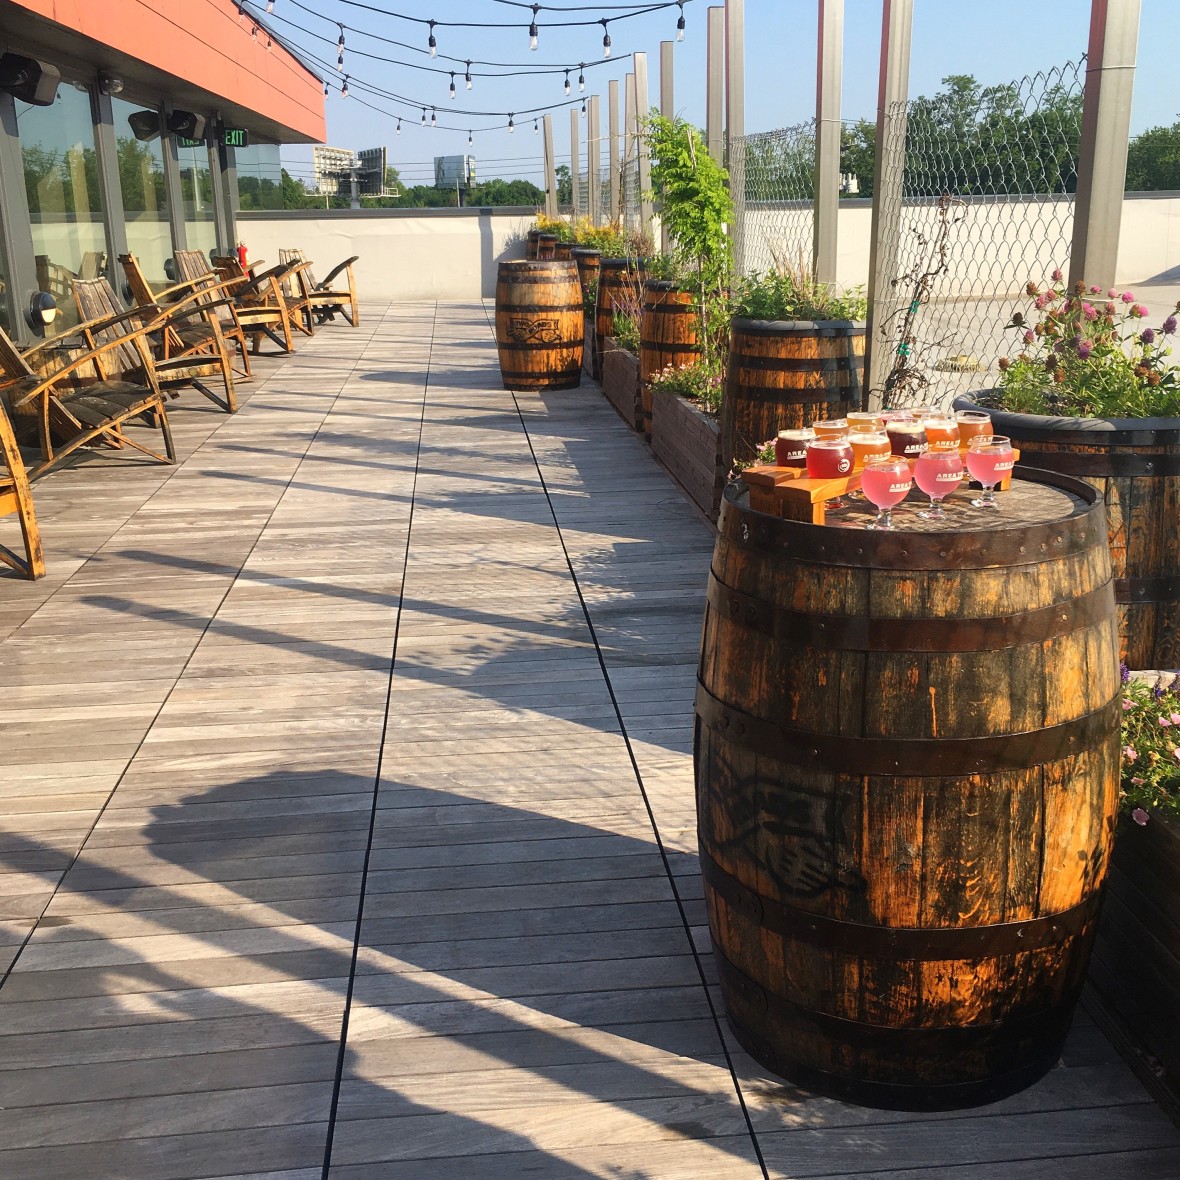 Rooftop outdoor dining space at Two Roads Brewery